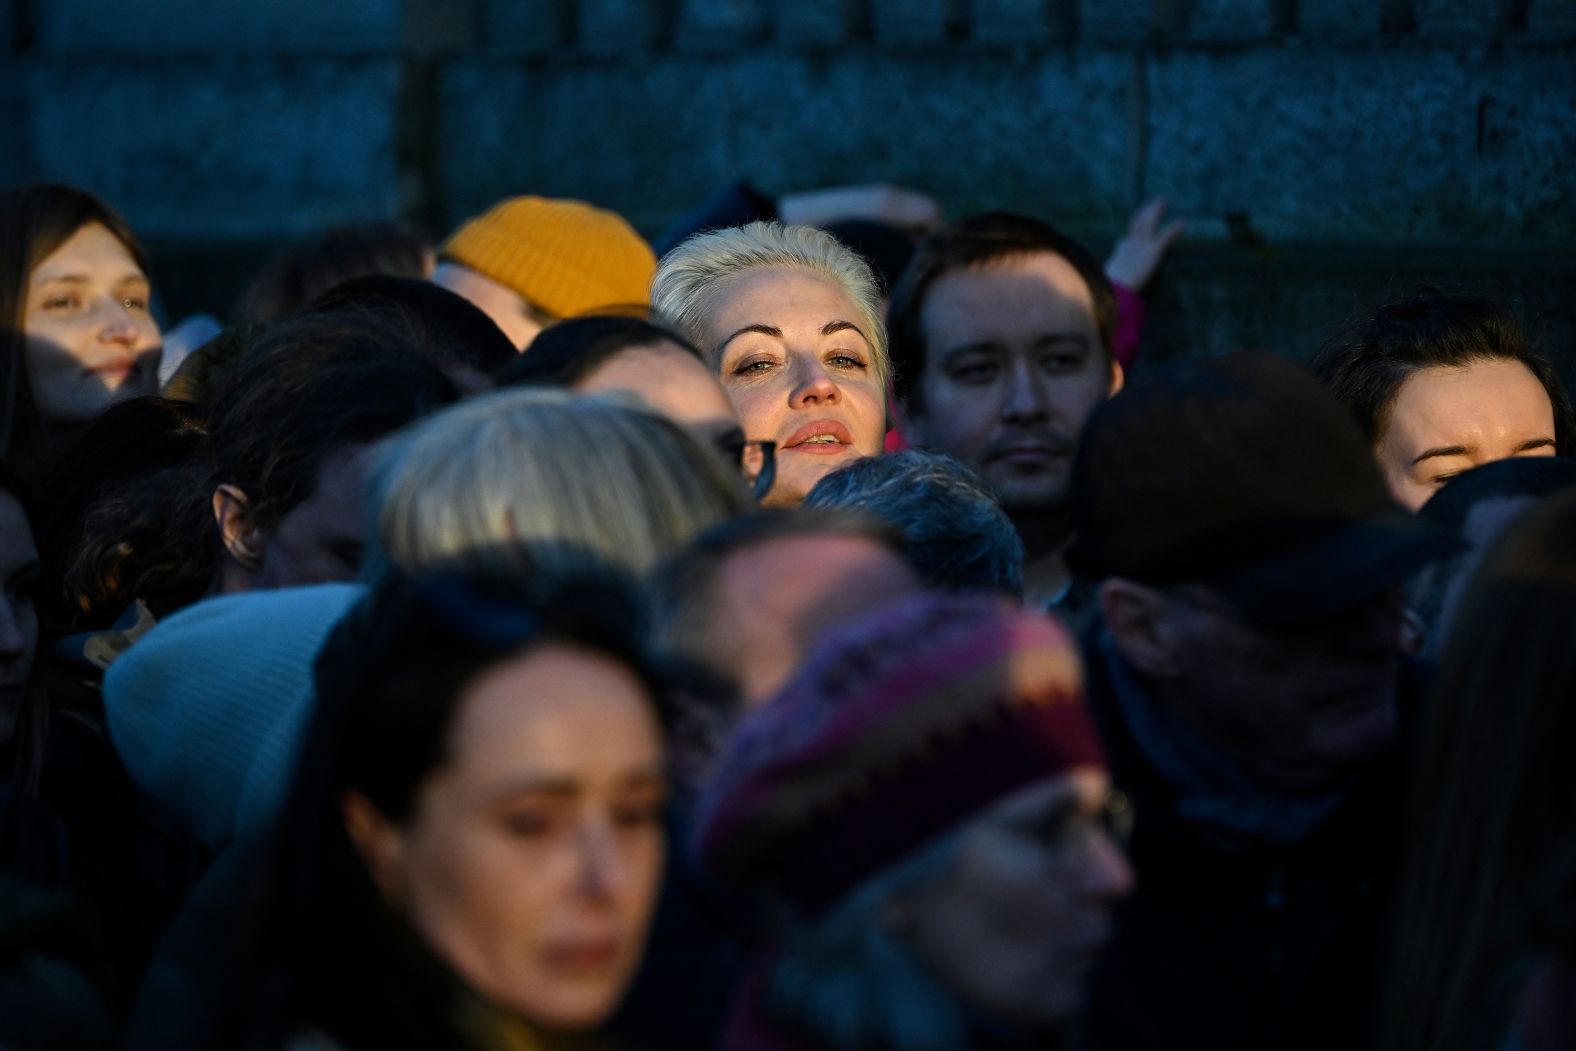 Yulia Navalnya, widow of the late opposition figure Alexey Navalny, lines up to vote in Russia's presidential election at the Russian embassy in Berlin on Sunday, March 17. Navalnaya had urged Russians to turn out collectively as a <a href="https://www.cnn.com/2024/03/17/europe/russia-election-navalny-protests-intl/index.html" target="_blank">show of opposition</a>.